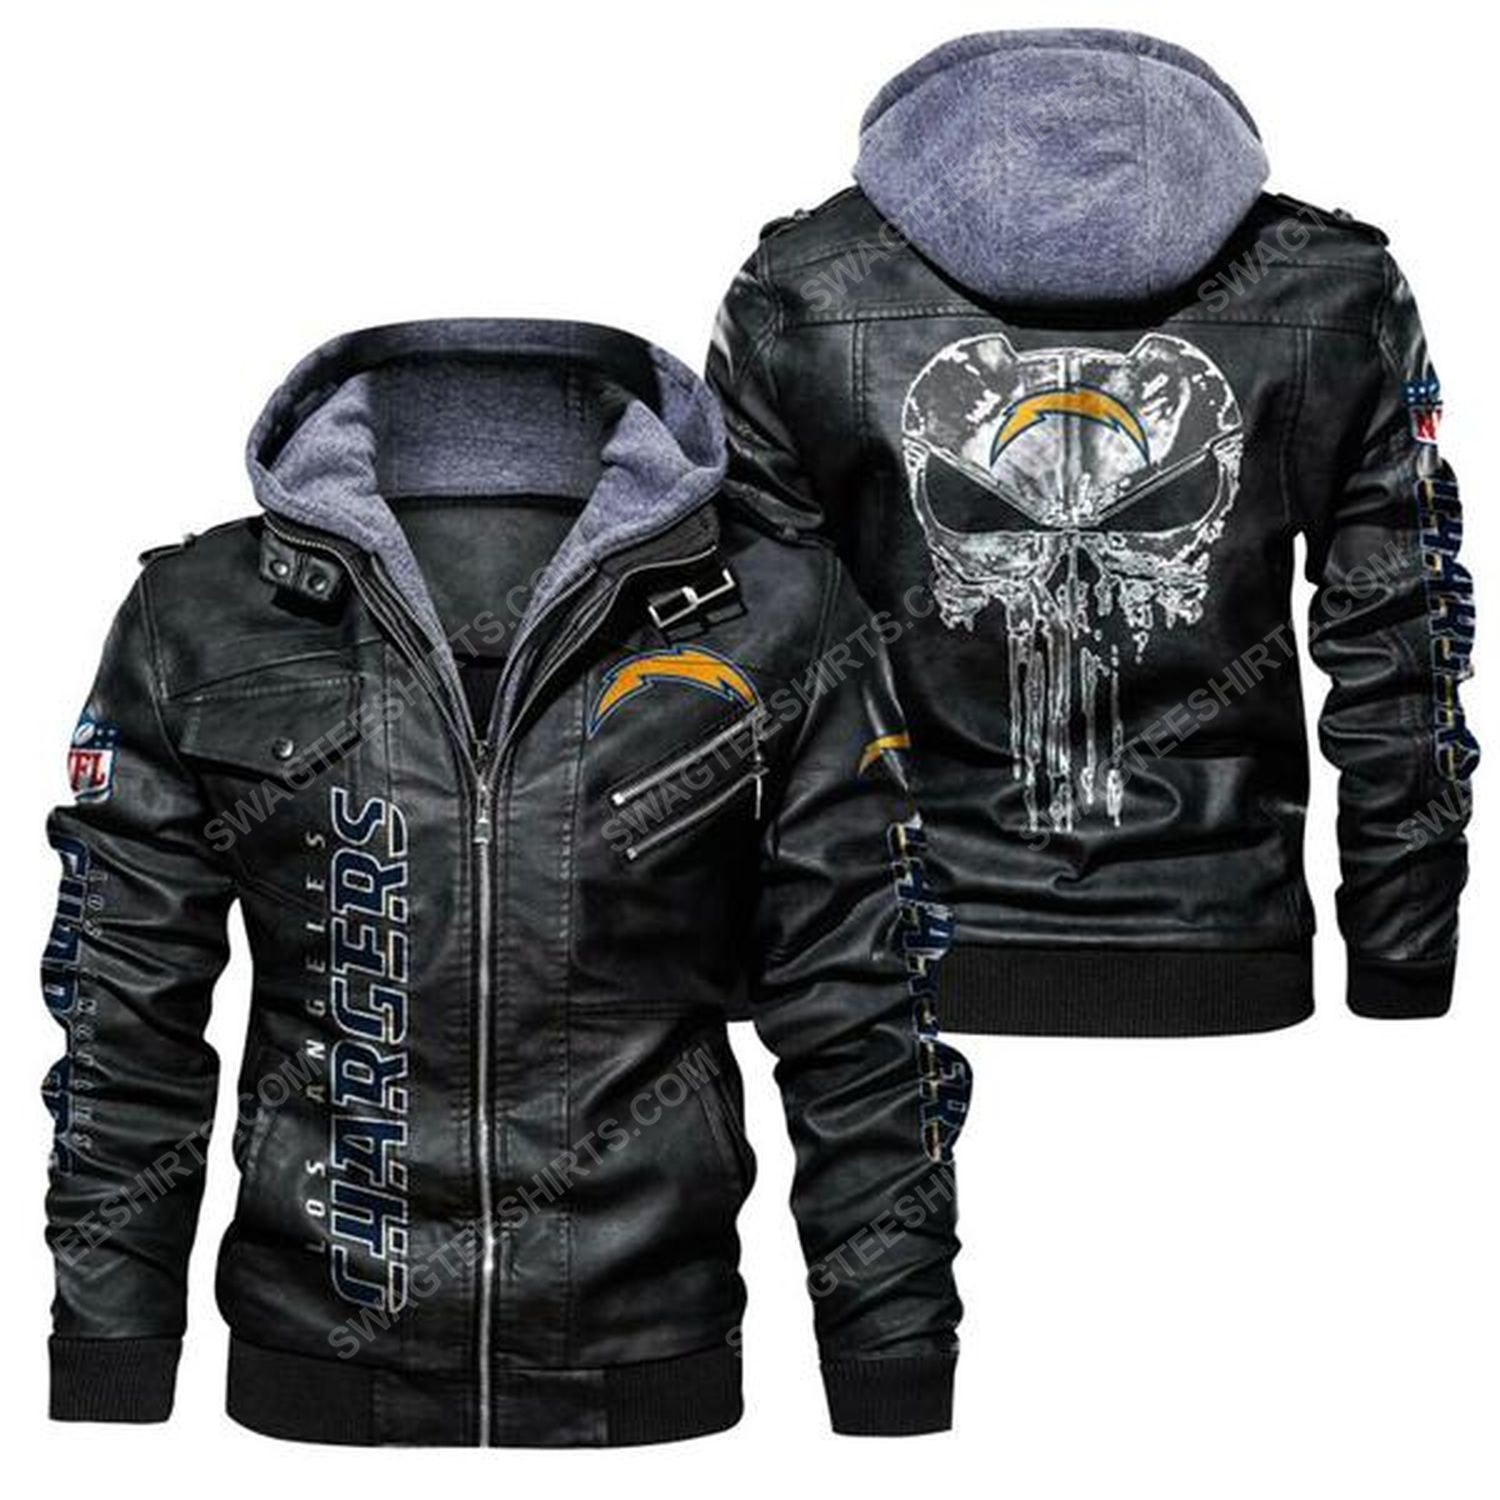 National football league los angeles chargers leather jacket - black